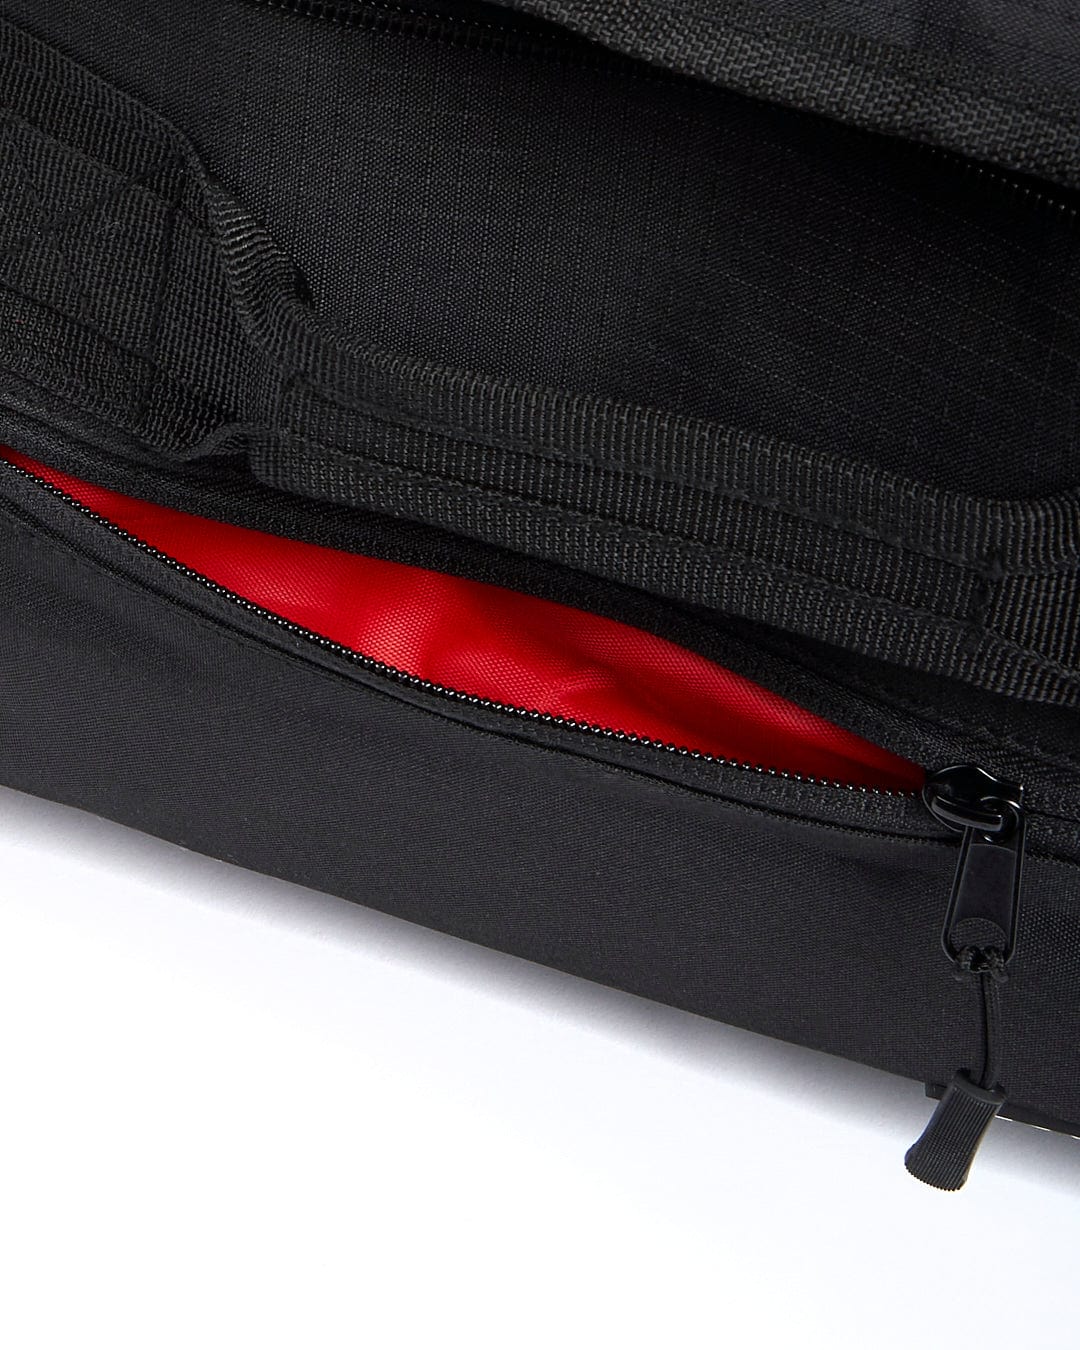 A Saltrock Mission - Holdall - Black duffel bag with a red zipper.